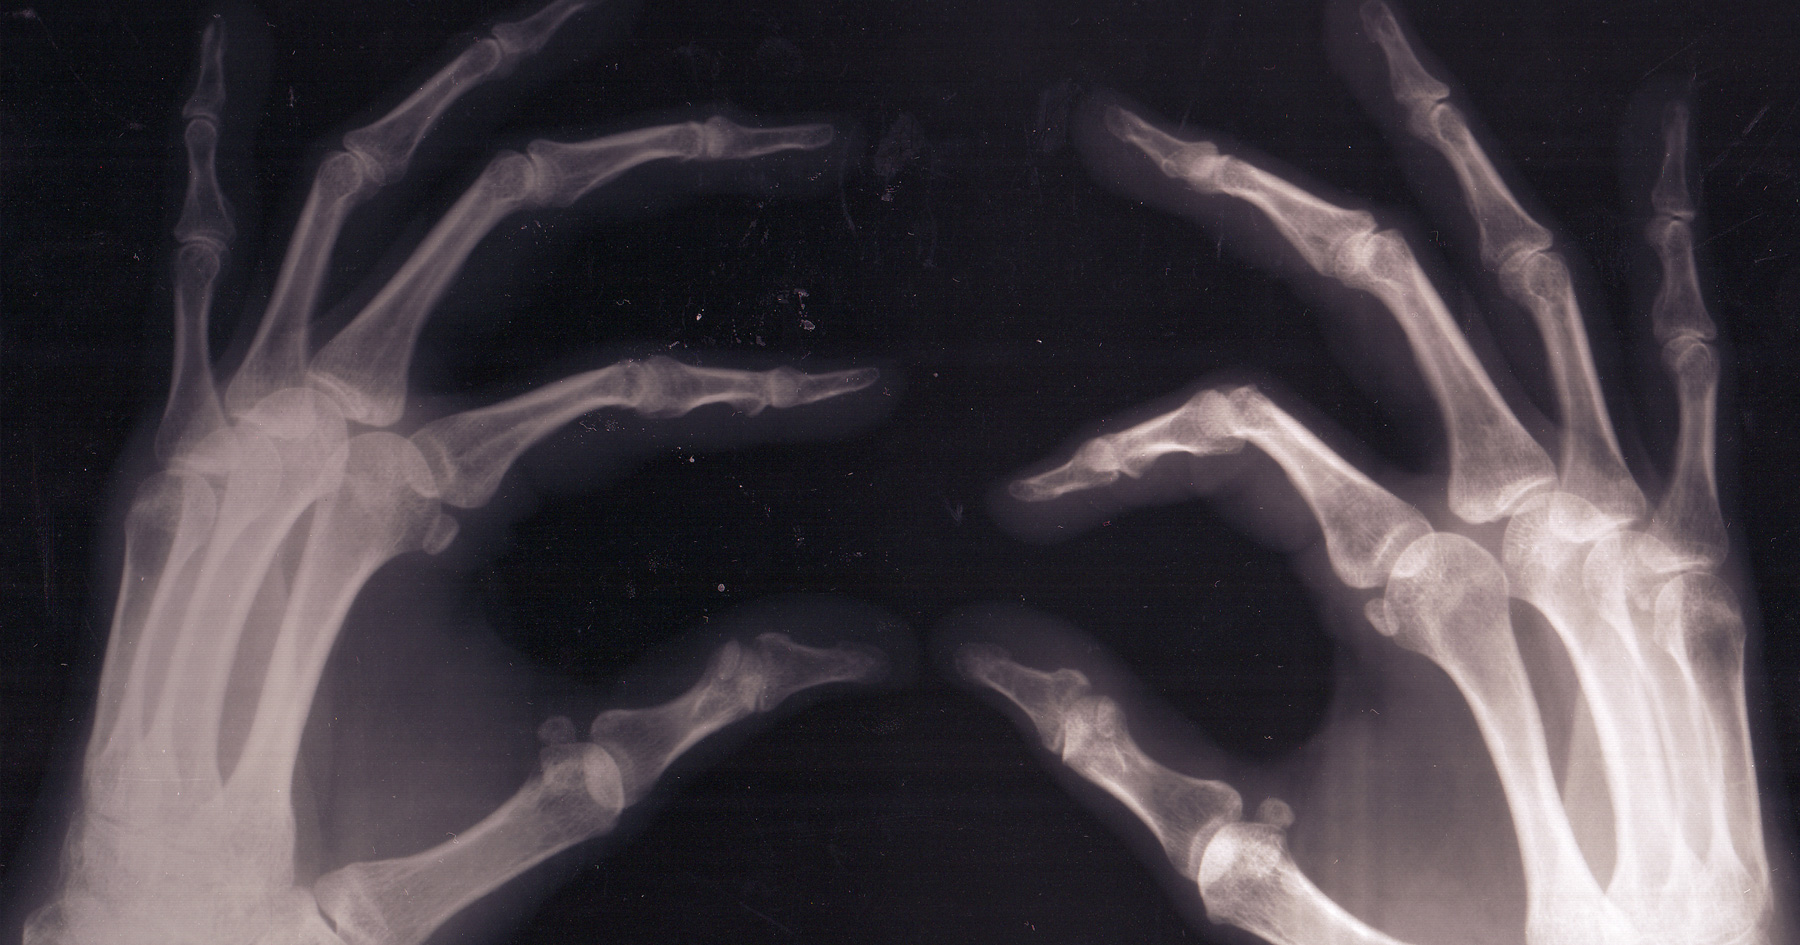 X-ray of bones in a hand